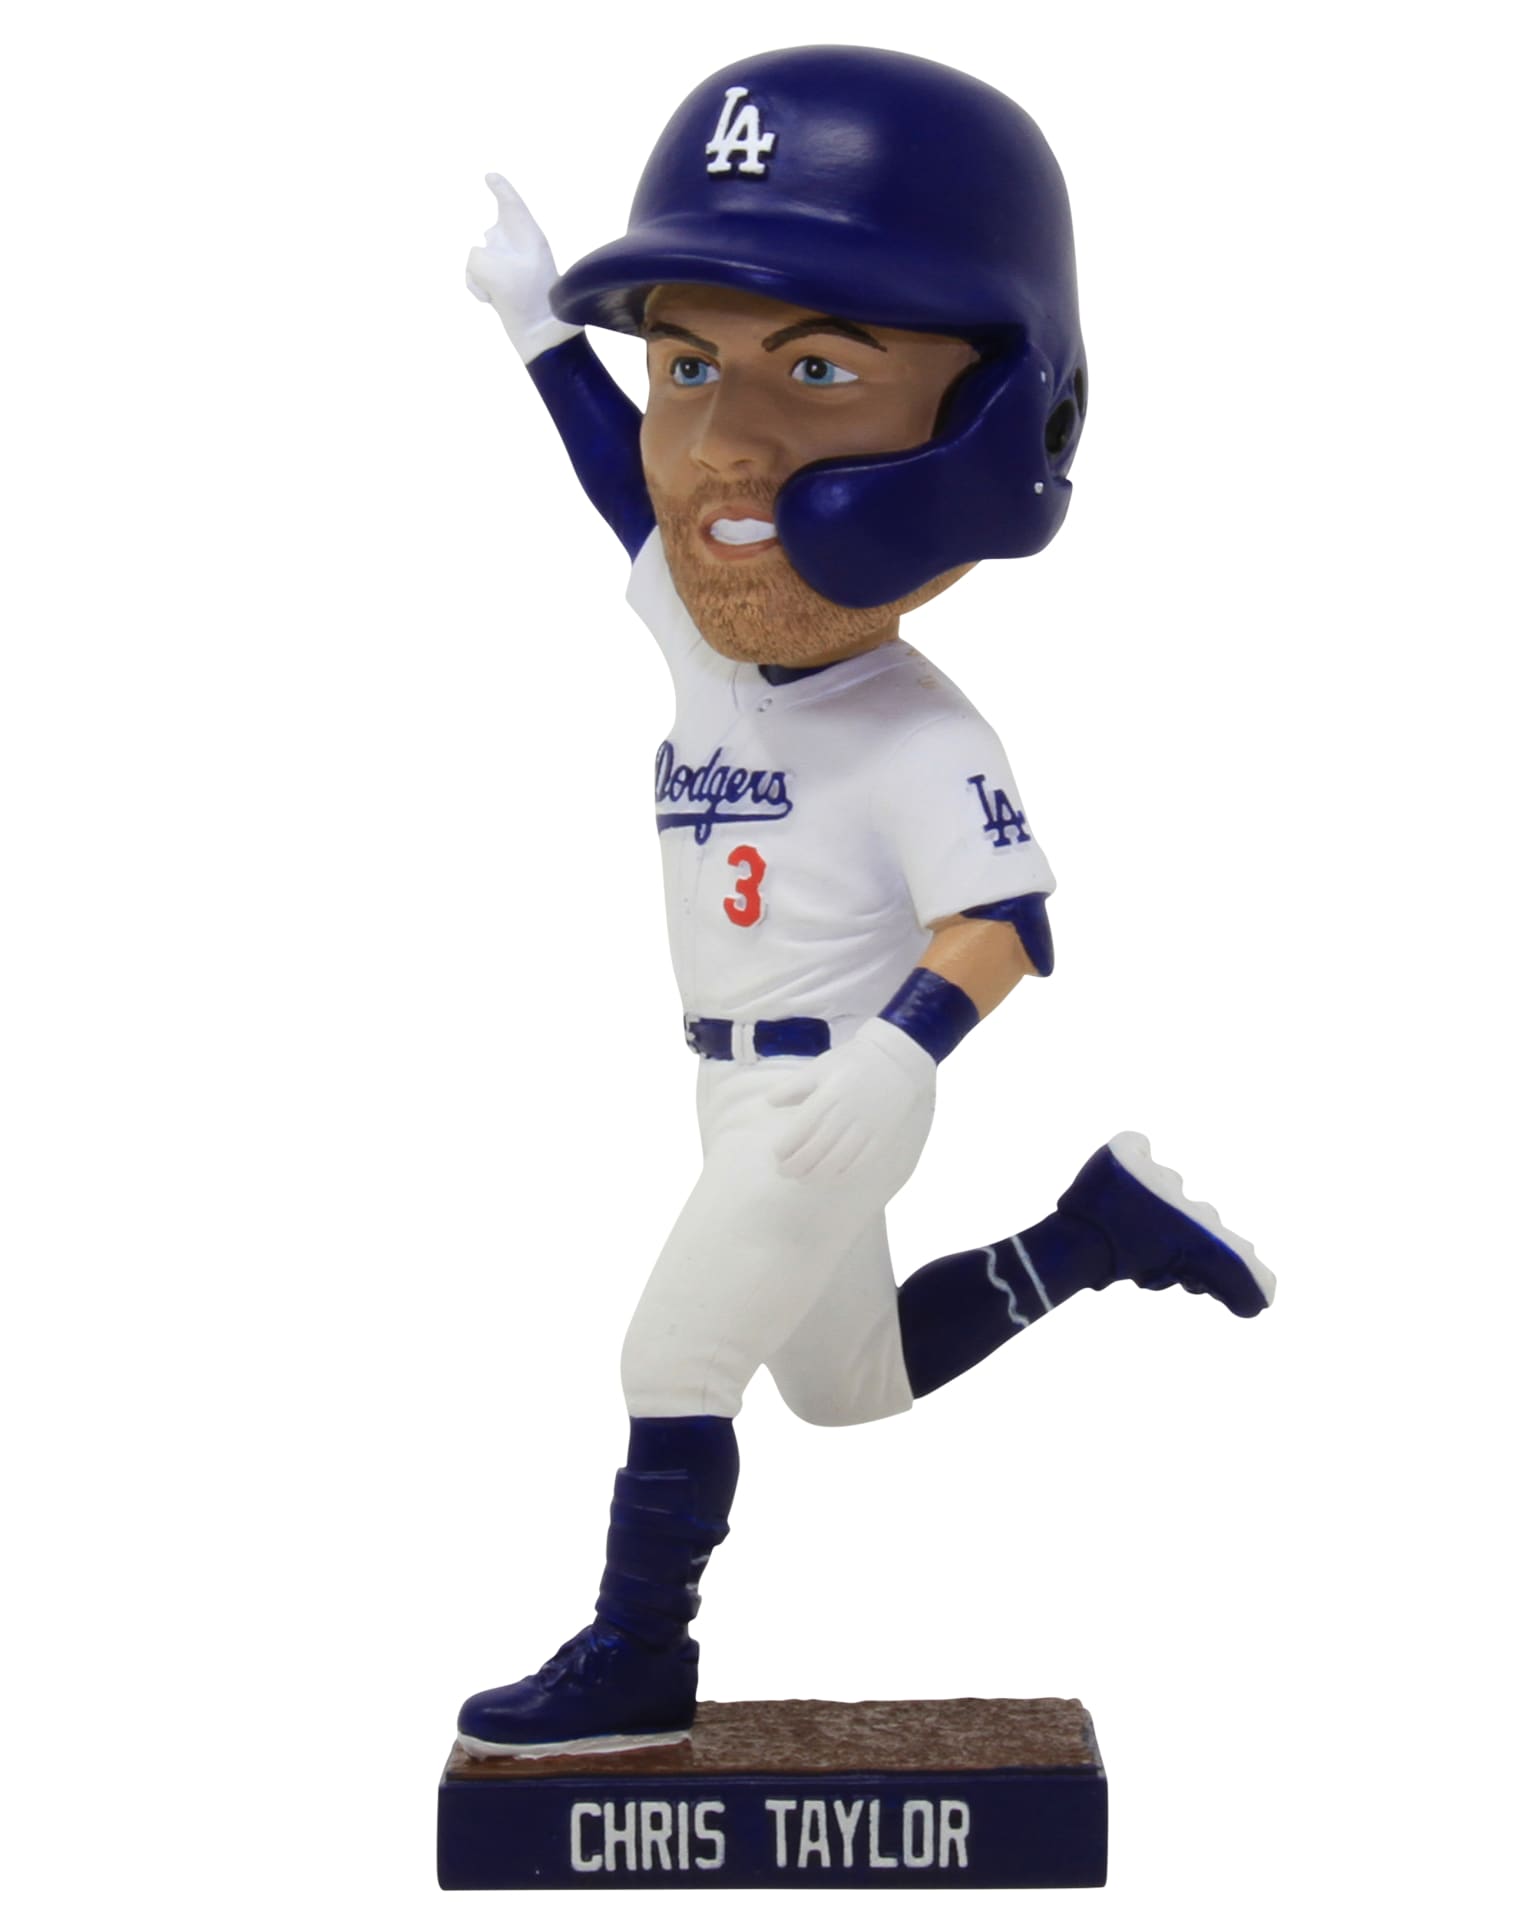 Giants-Dodgers: Max Muncy bobblehead night features a contentious